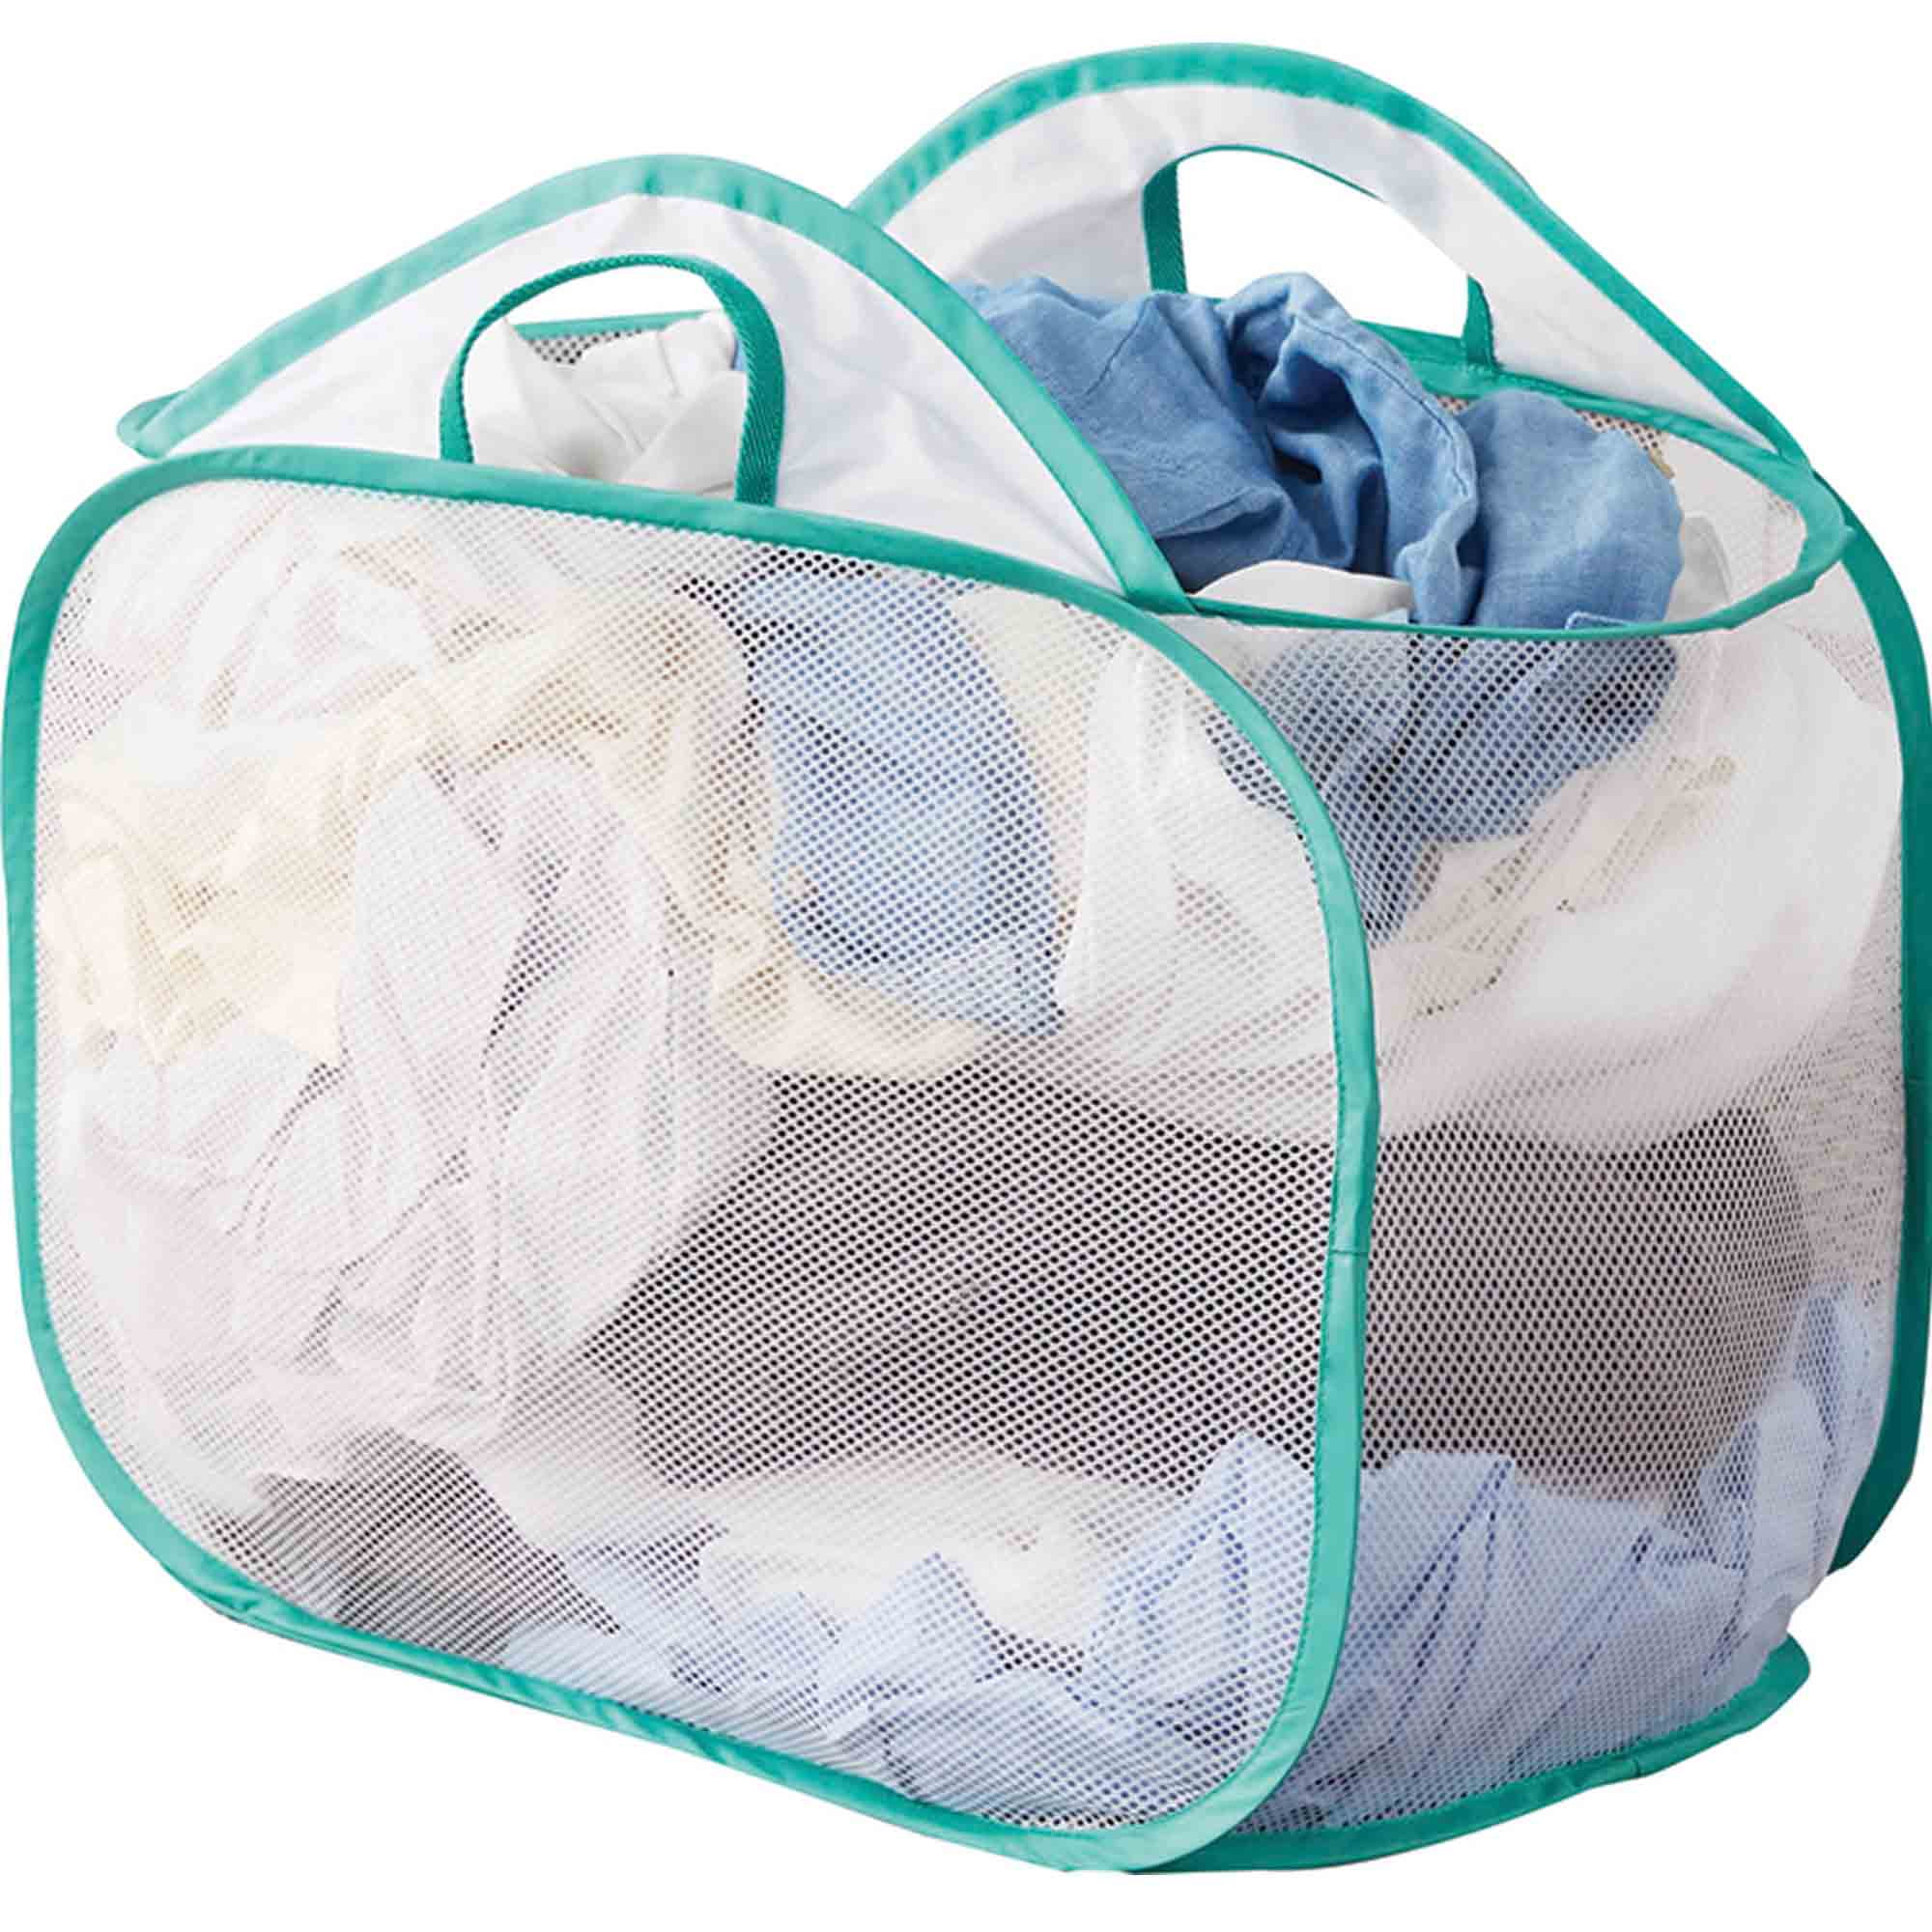 Mainstays Slim Polyester Collapsible Laundry Hamper with Velcro Lid 